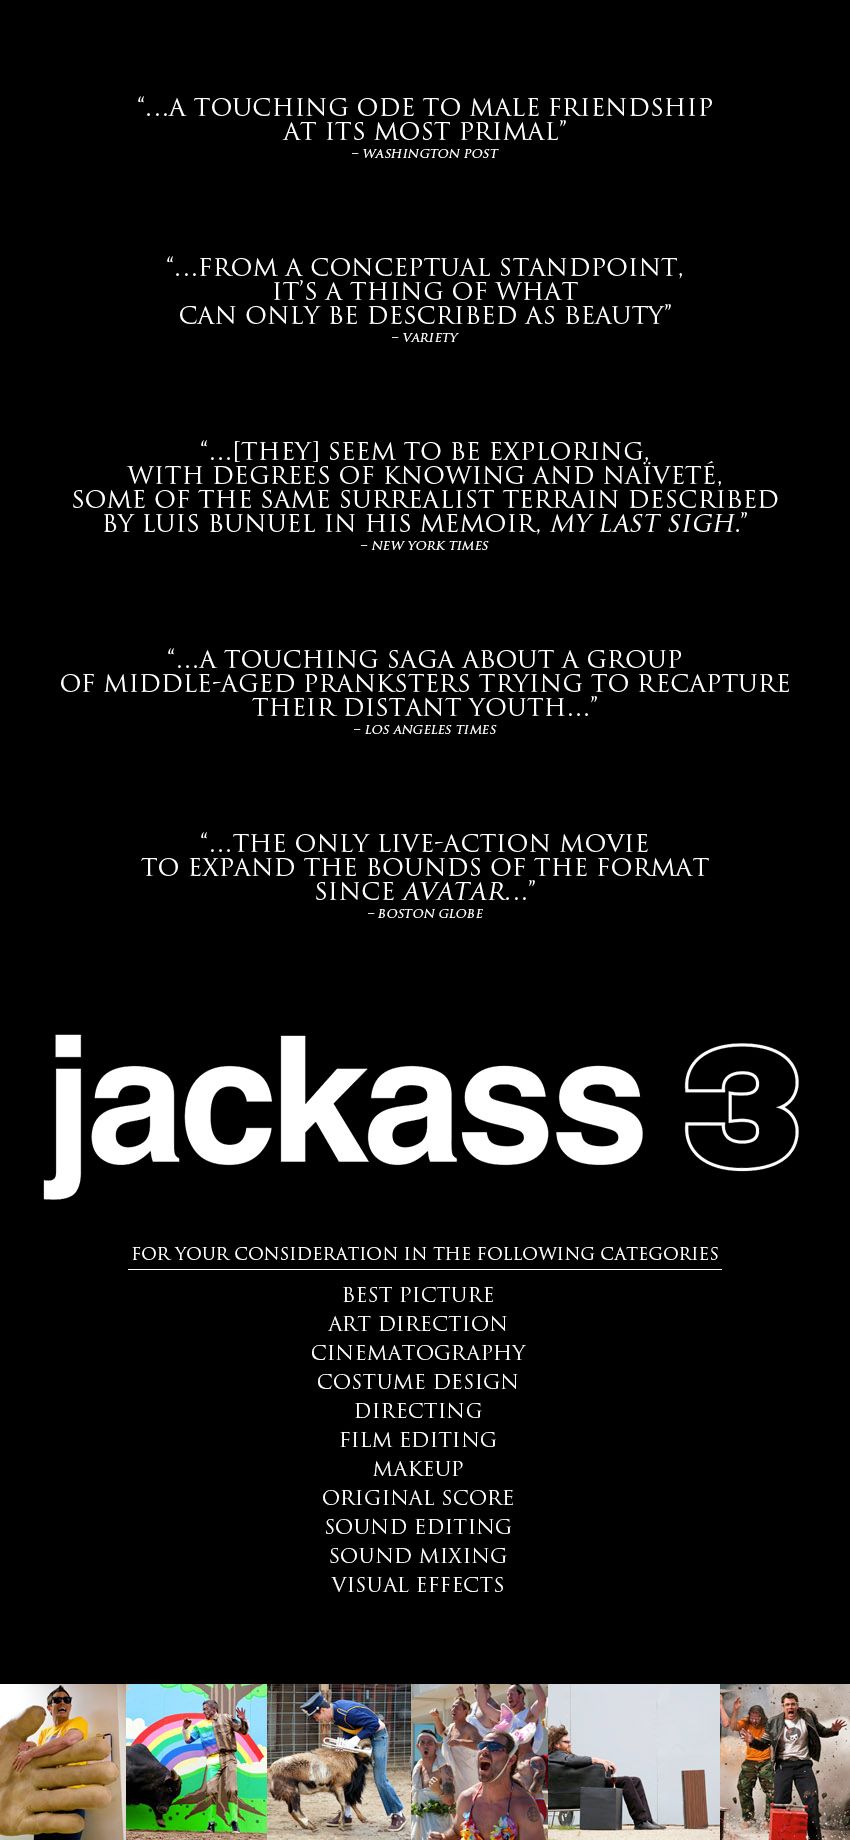 jackass-3-for-your-consideration-ad